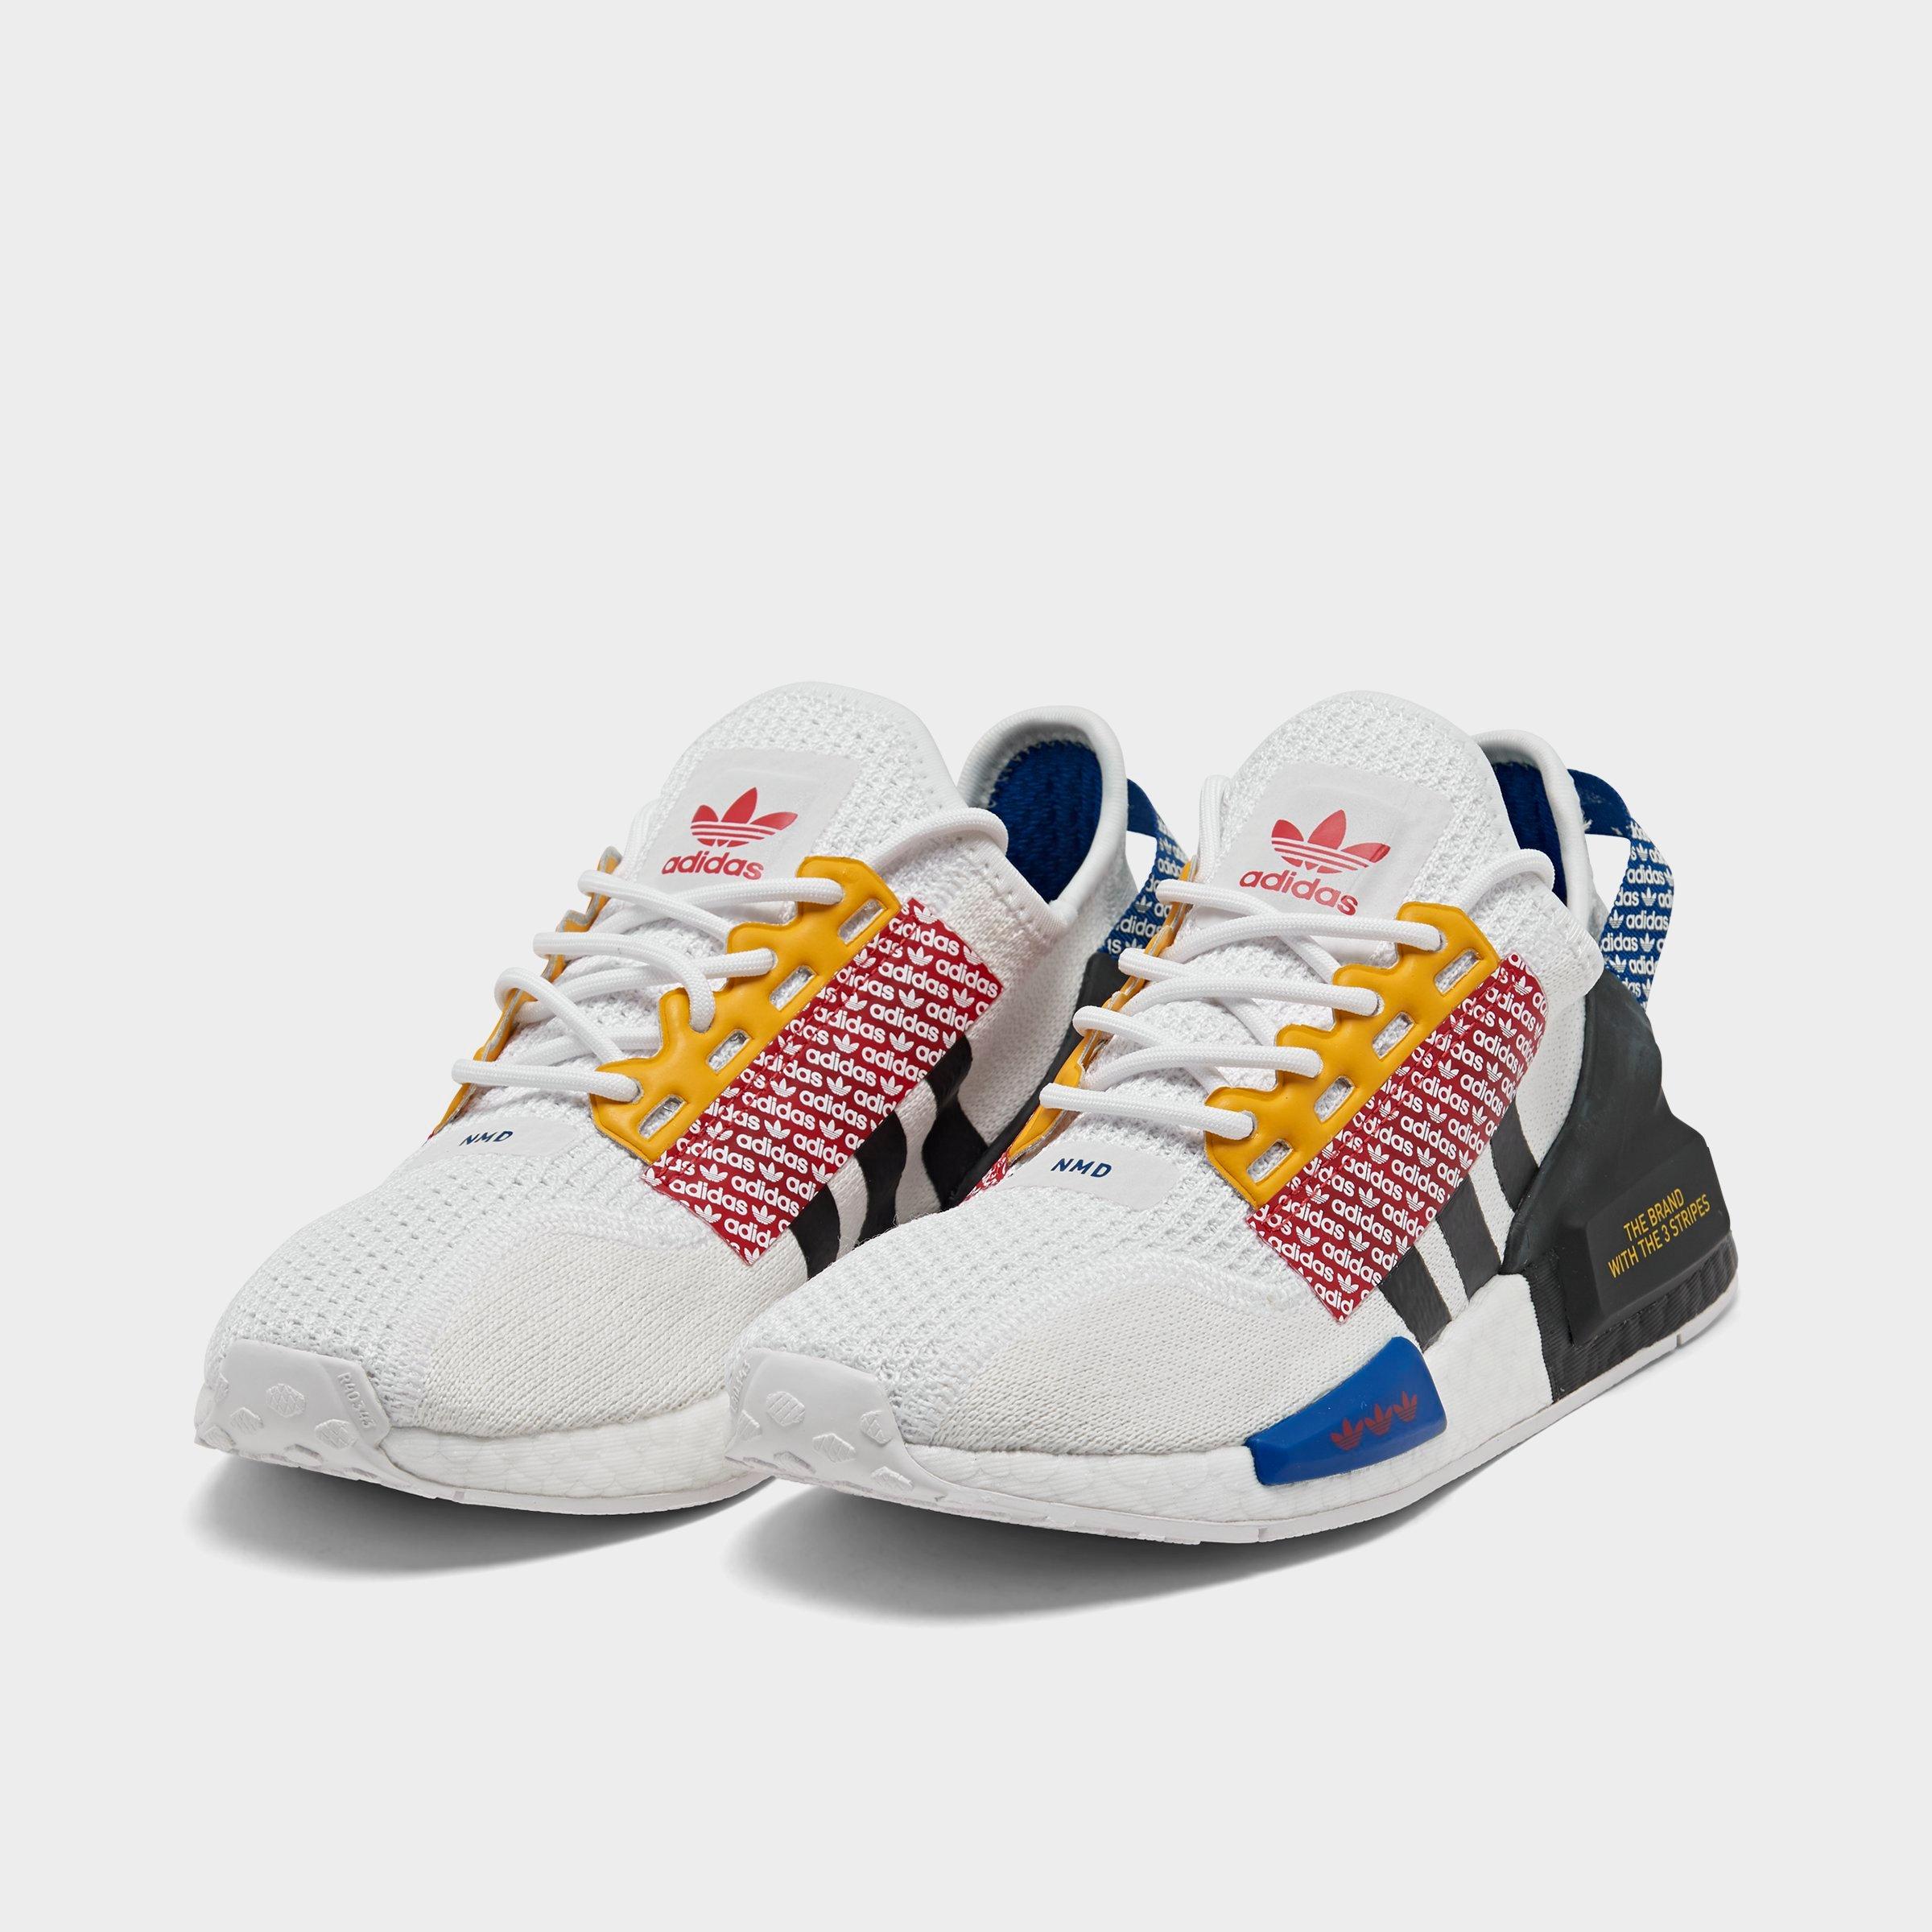 adidas nmd r1 v2 casual shoes